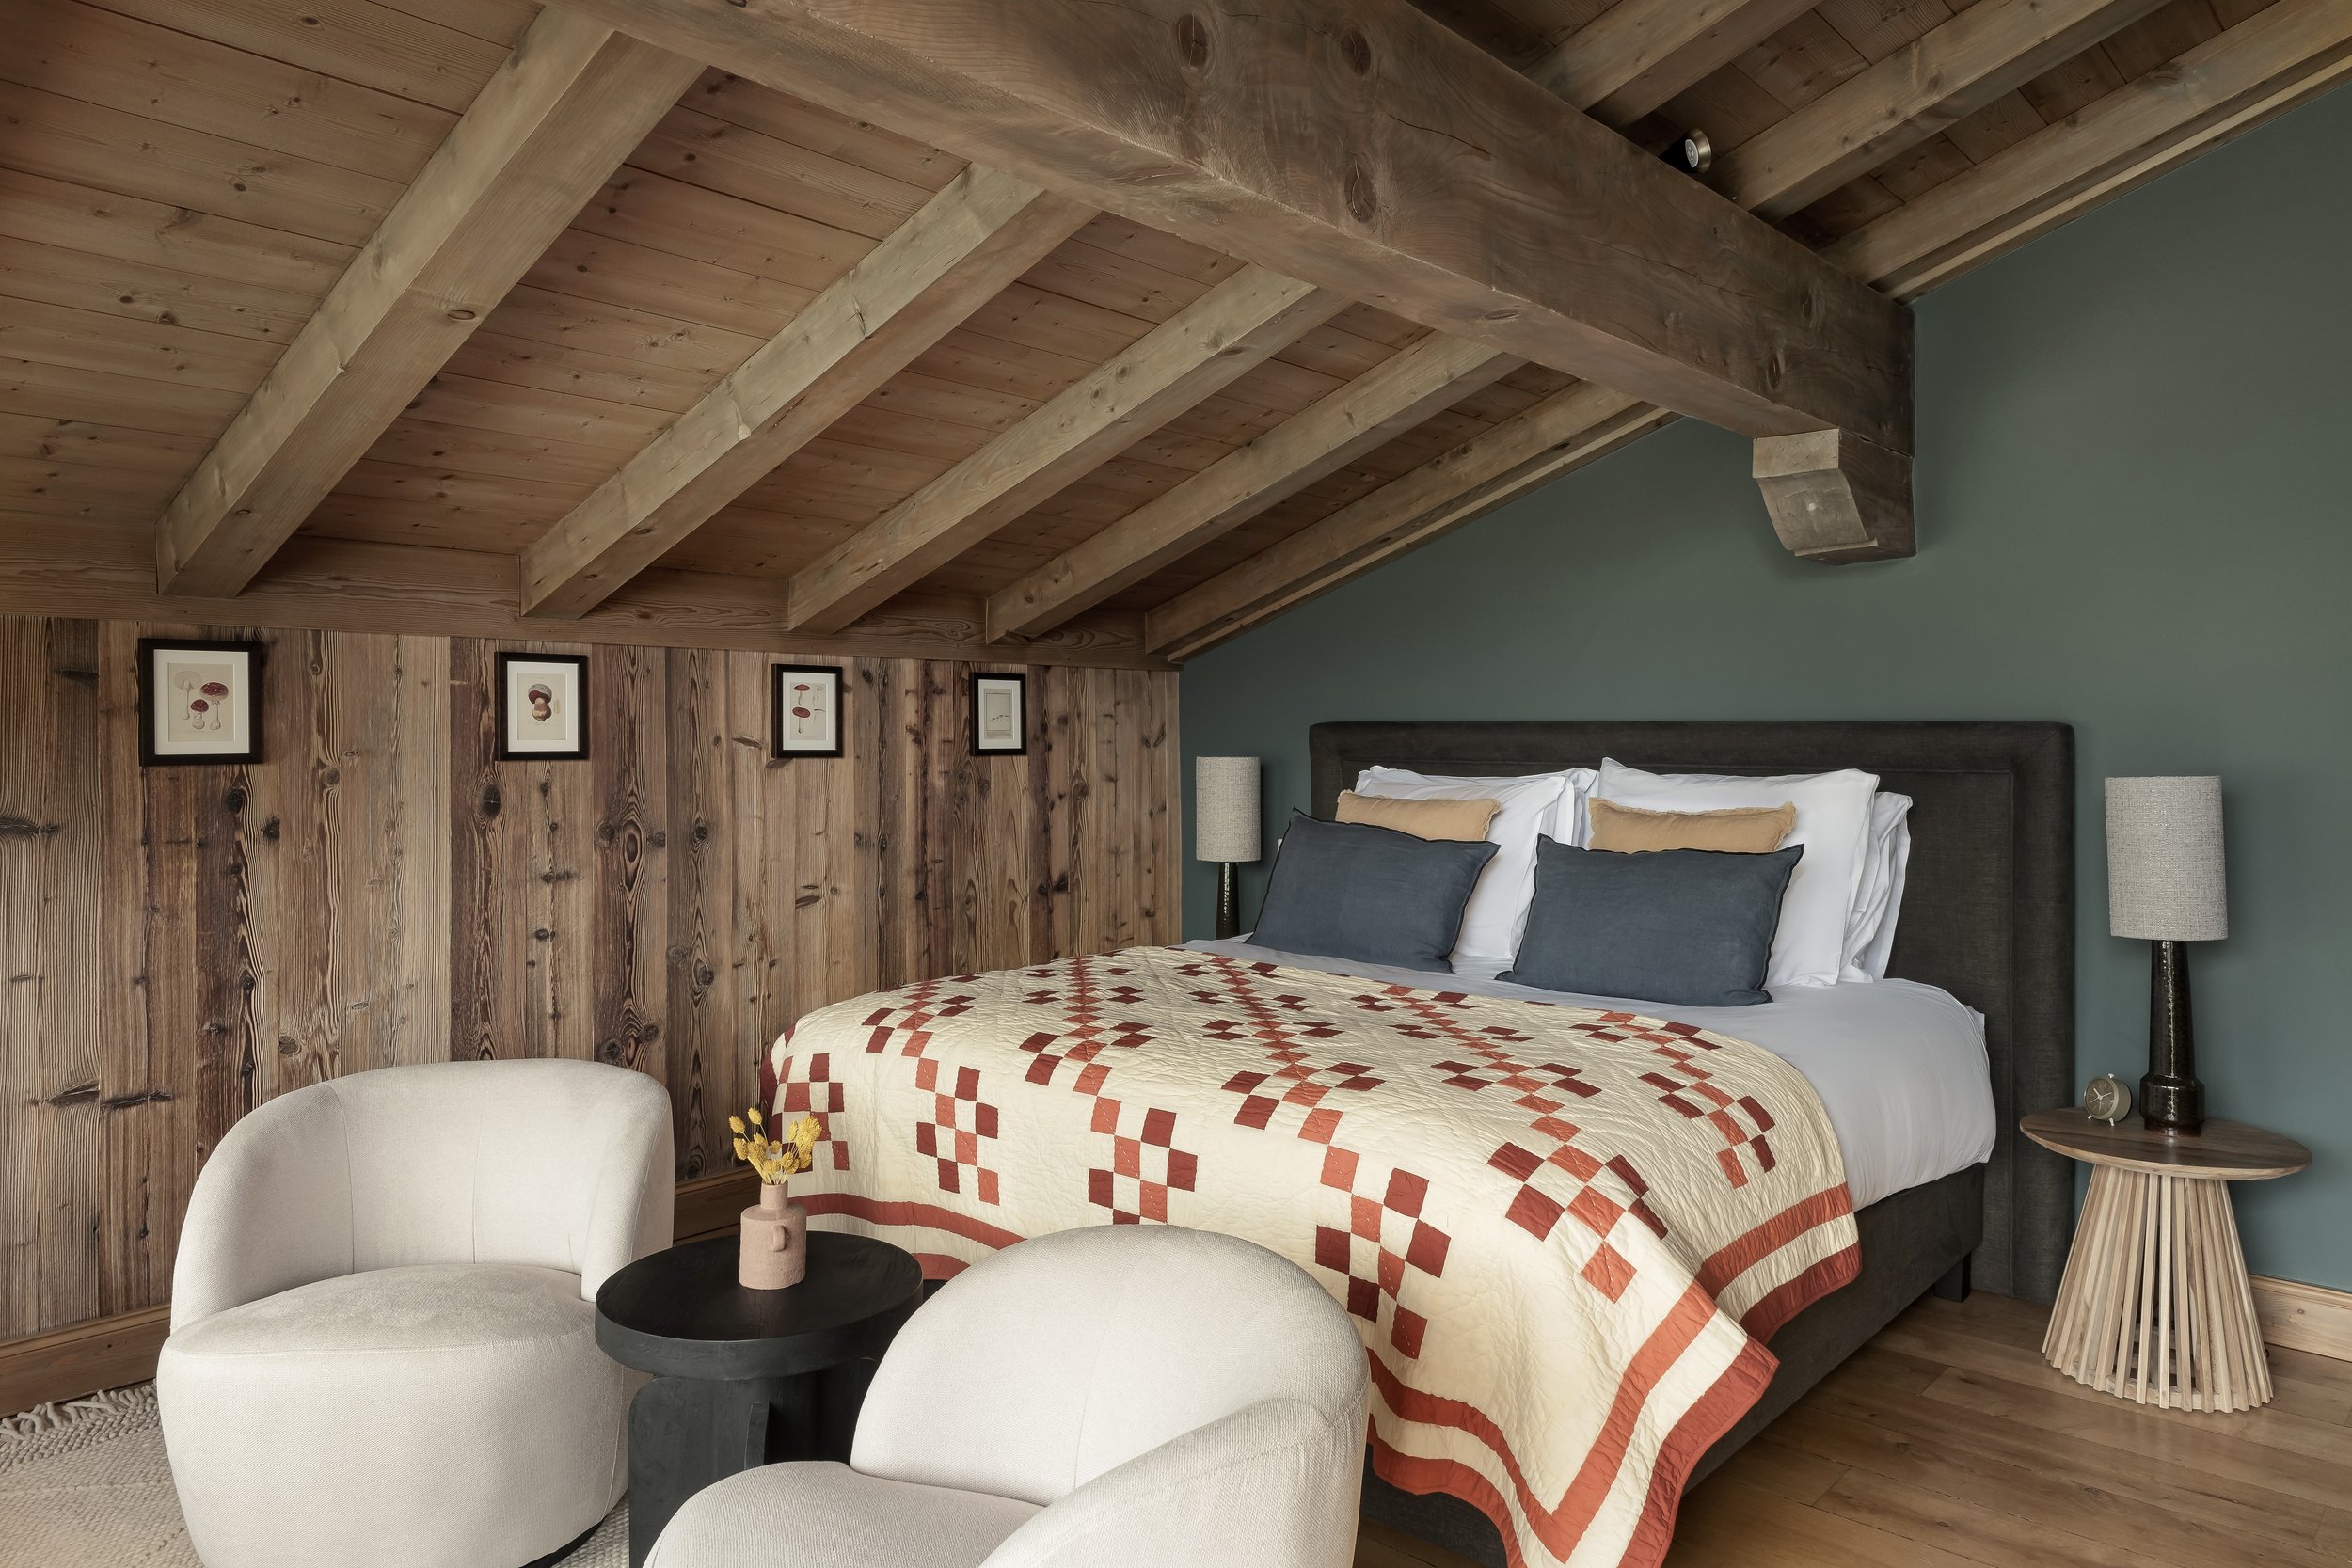 Francis+York+Discover This Luxury Chalet in the French Alps From The August Premium Collection 00071.jpg